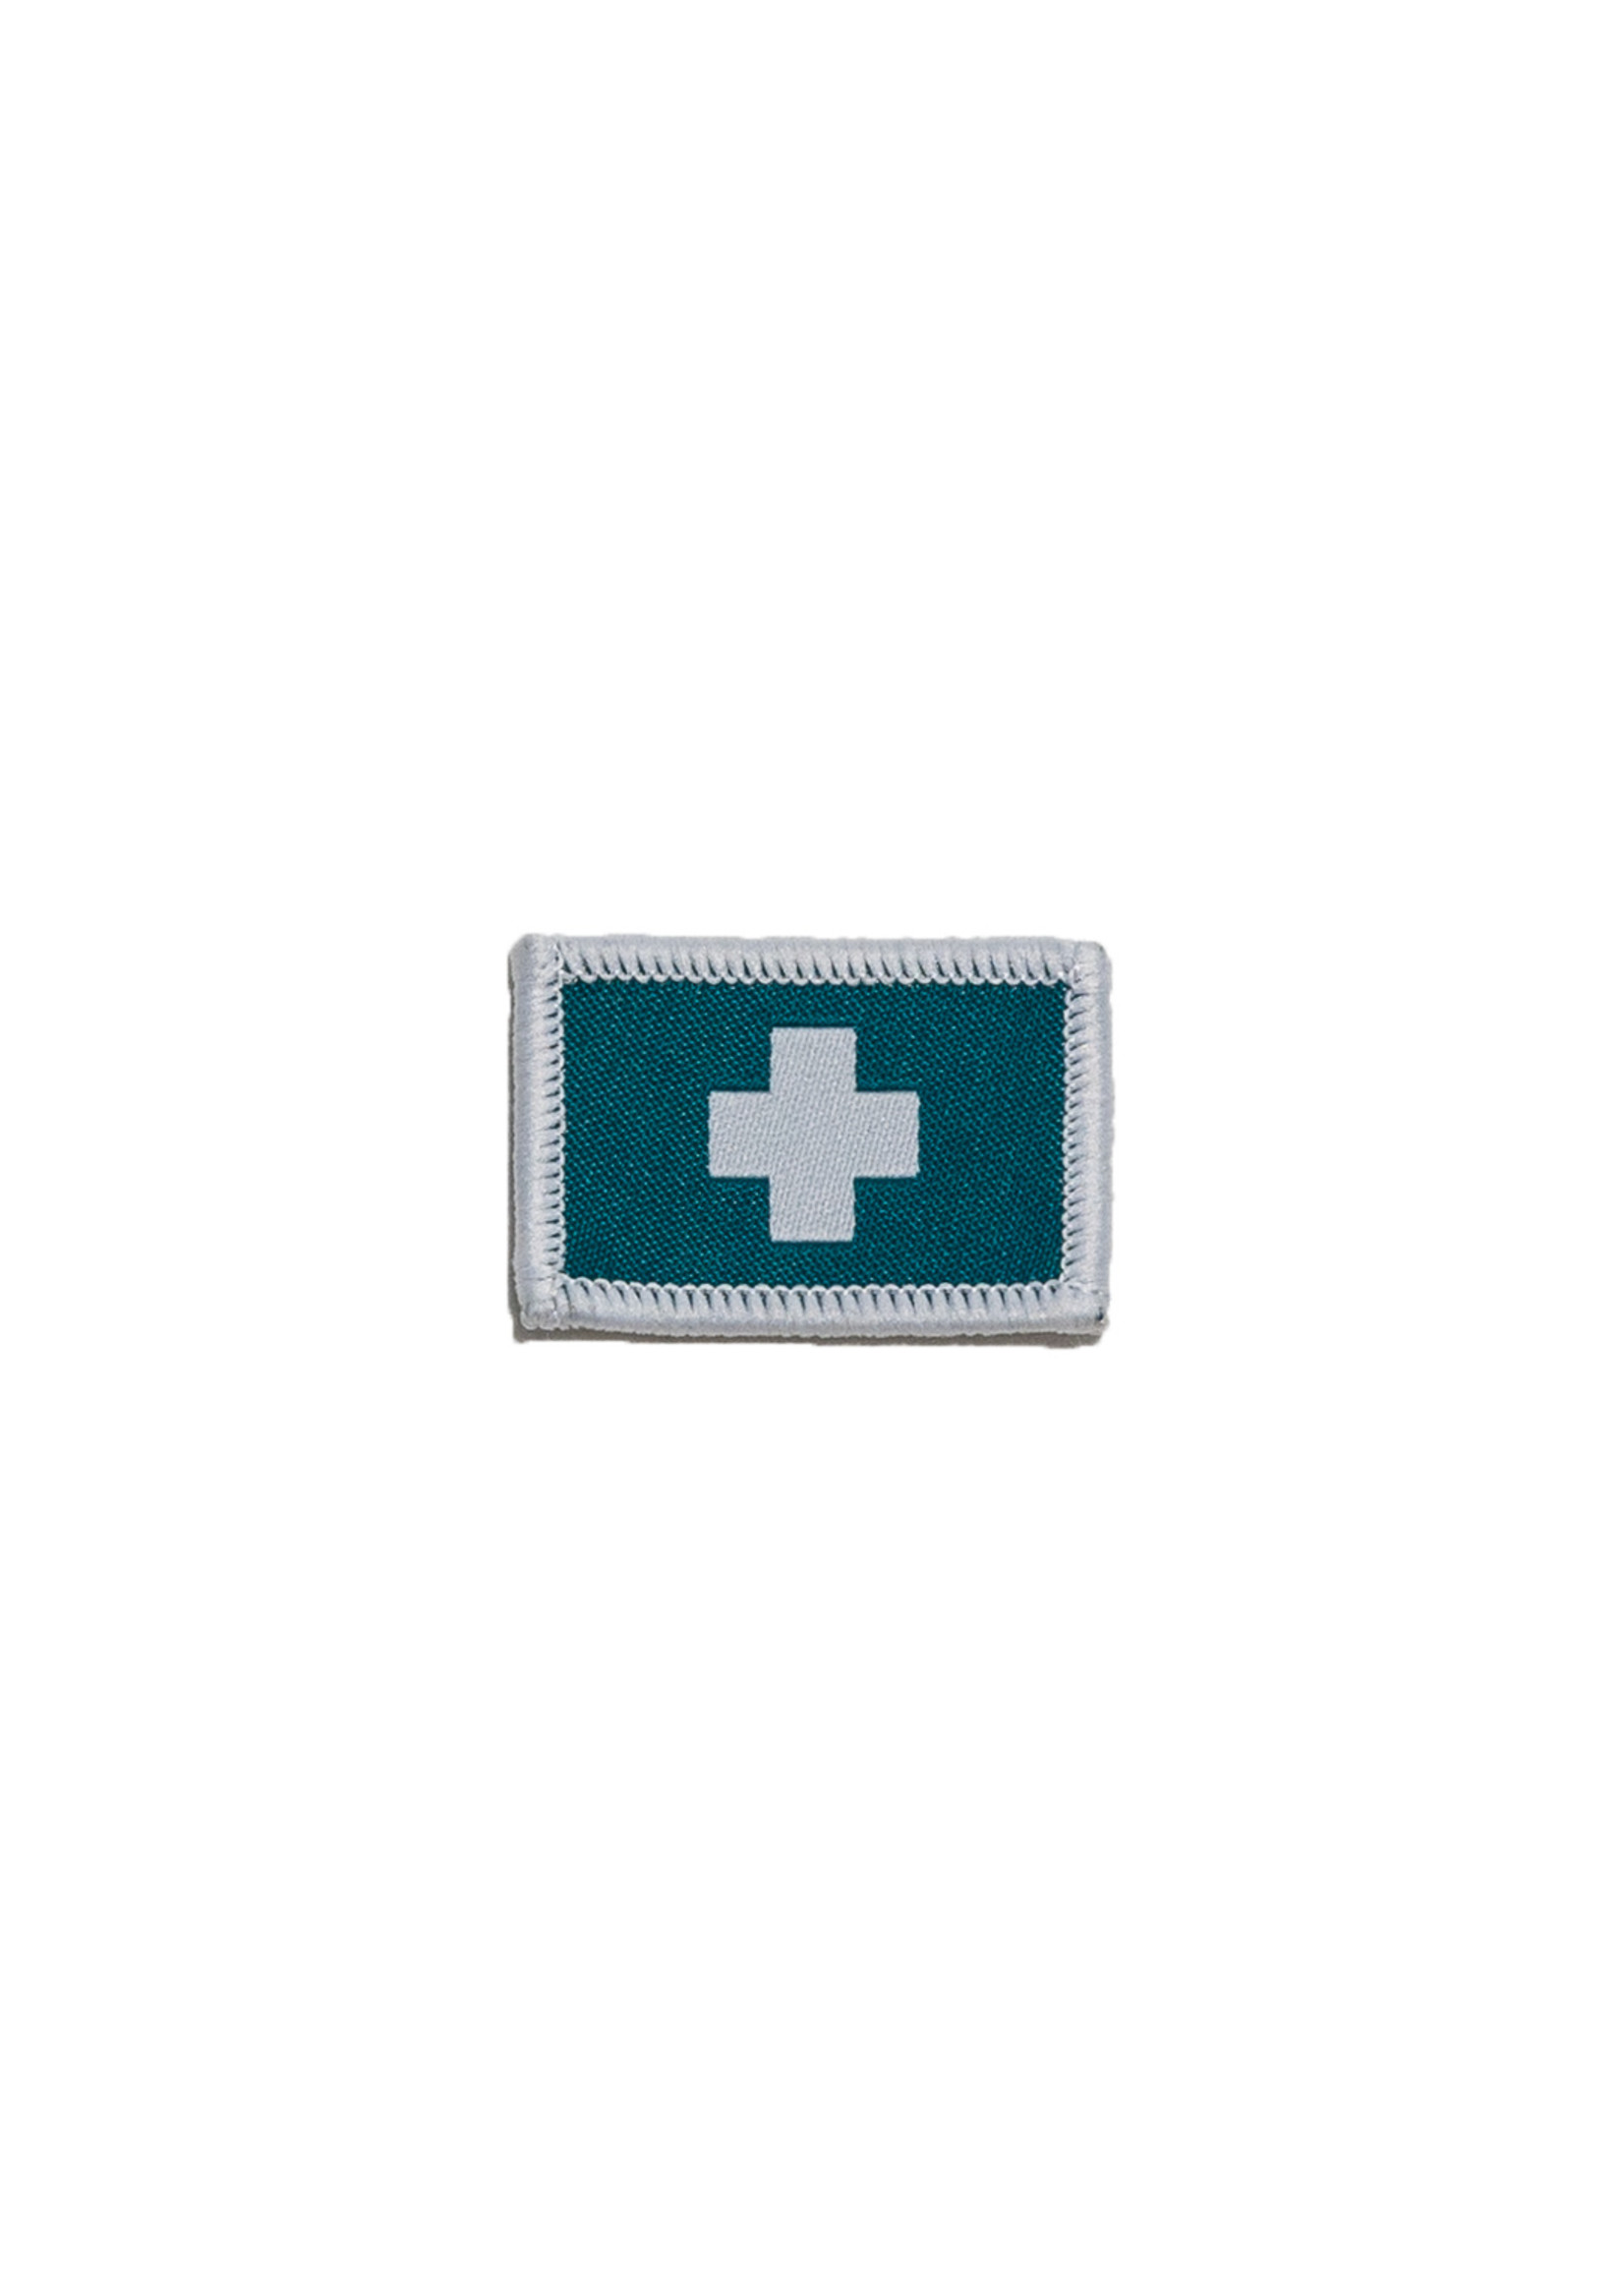 General First Aid Badge